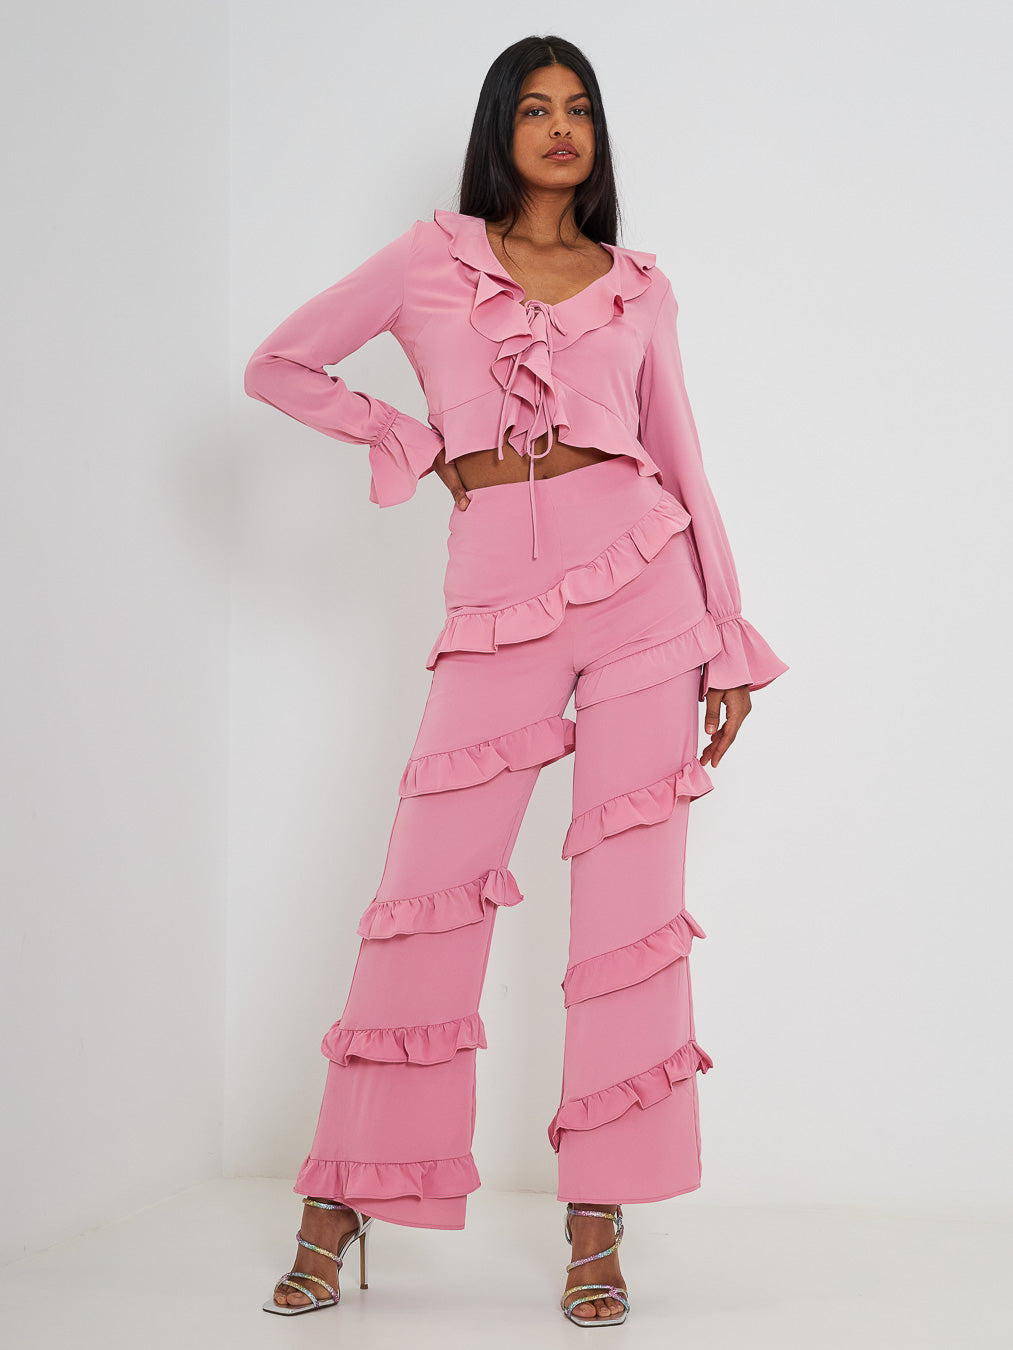 Glamorous coordinated top and trousers with pink ruffles